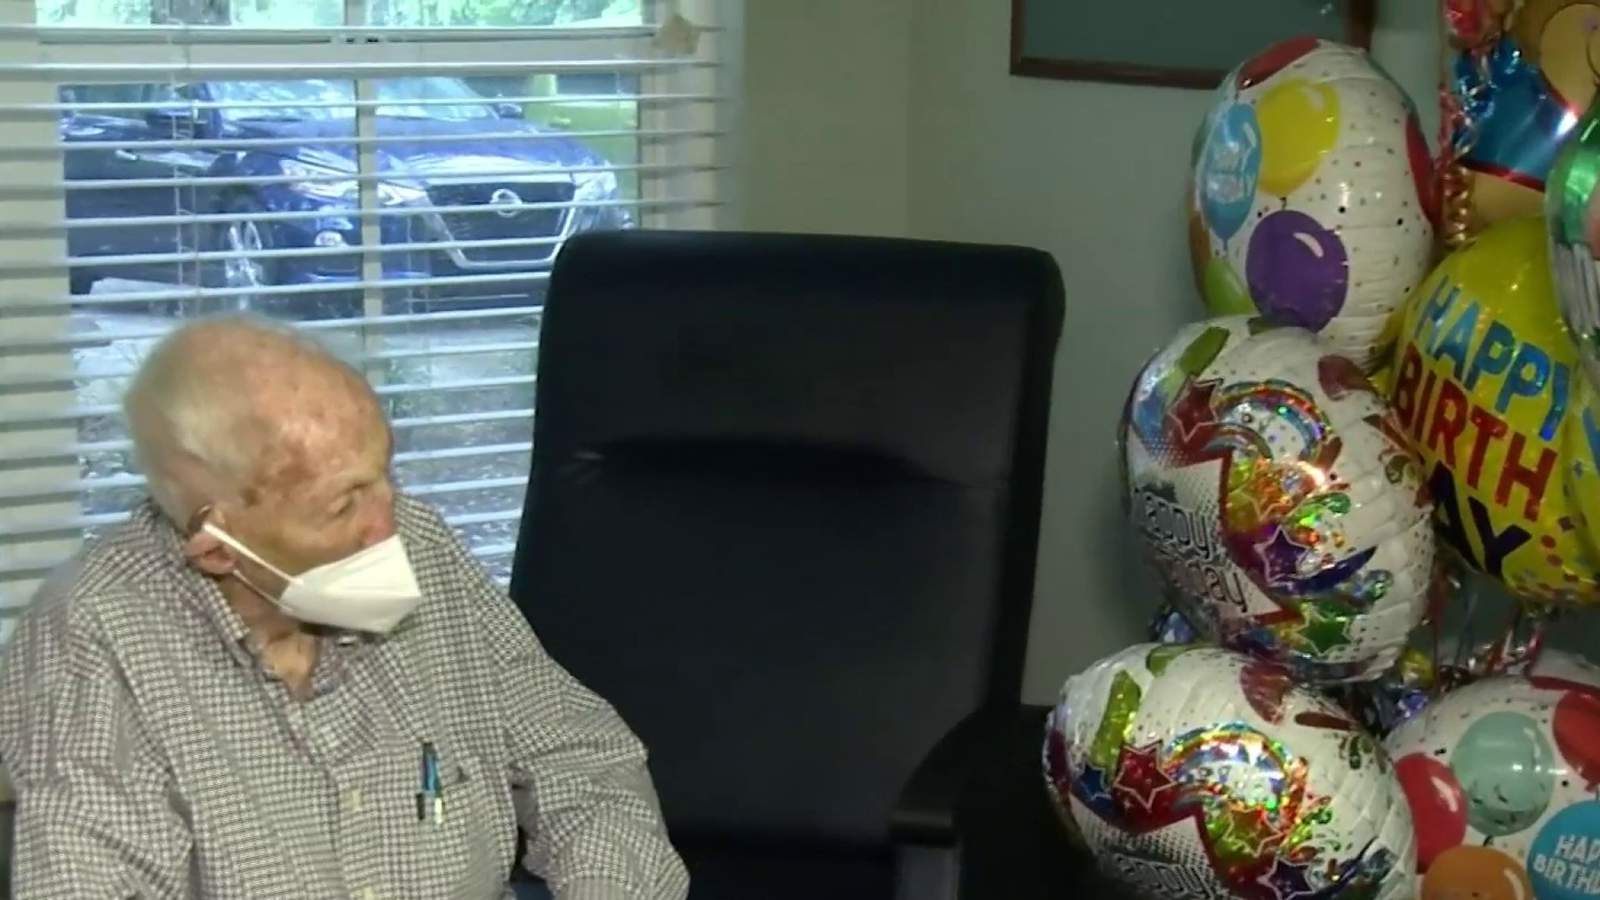 Birthday blowout: WWII veteran gets special surprise to celebrate turning 95